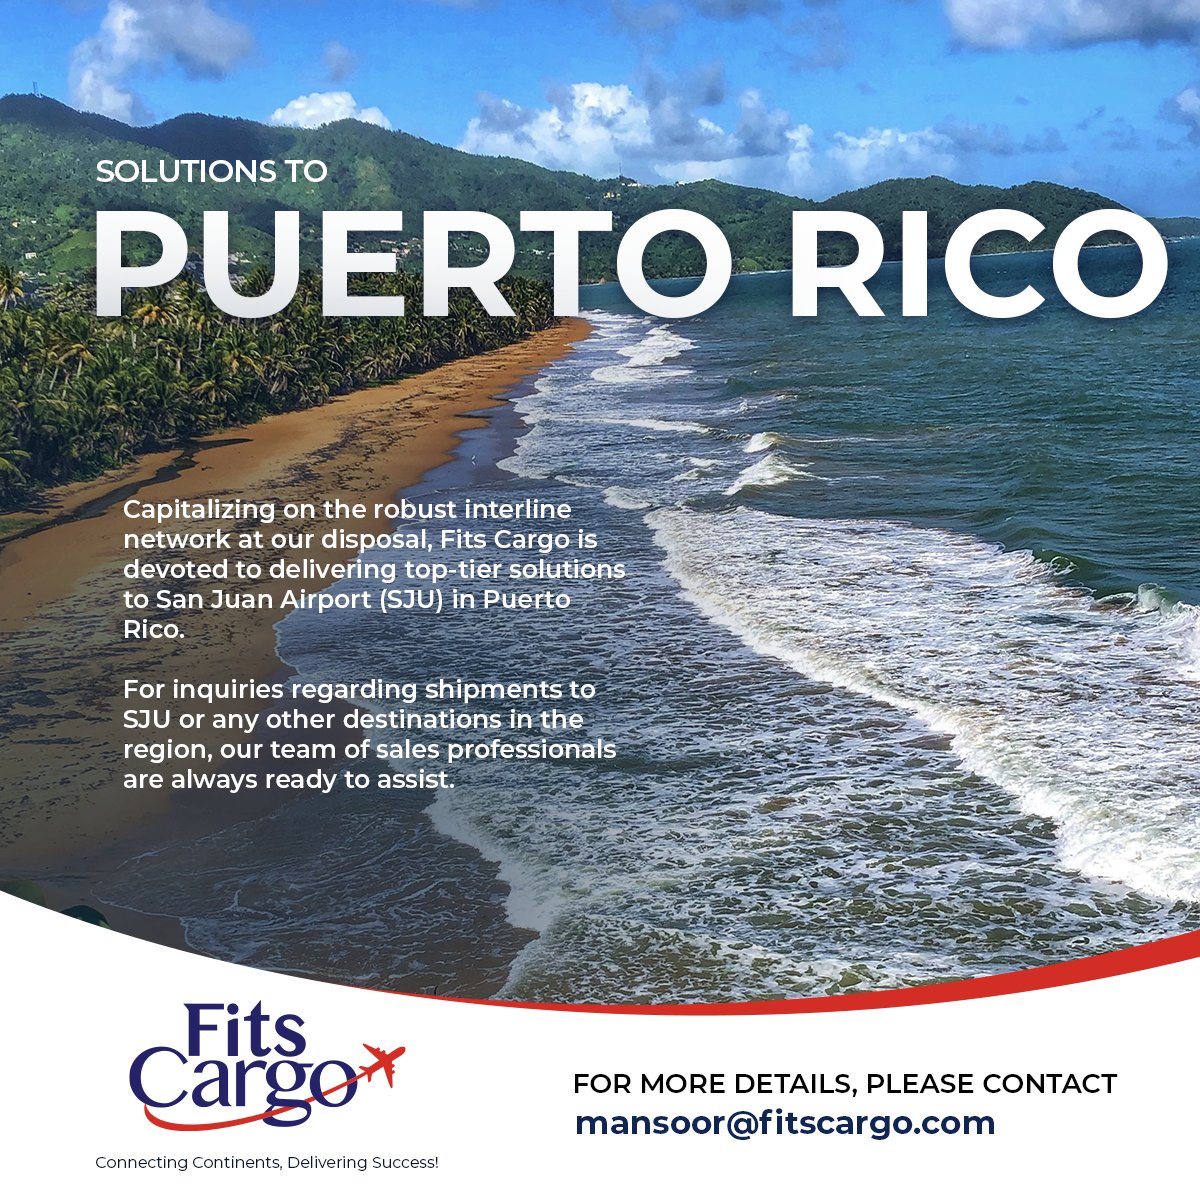 For any Air export shipments from BOM, COK or GOI to Luis Muñoz Marín International Airport (SJU), Puerto Rico, please feel free to contact me on mansoor@fitscargo.com #Aircargo #Export #Airfreight #import #logistics #Freightforwarding #Supplychain #Pharma #Chemicals #dgcargo